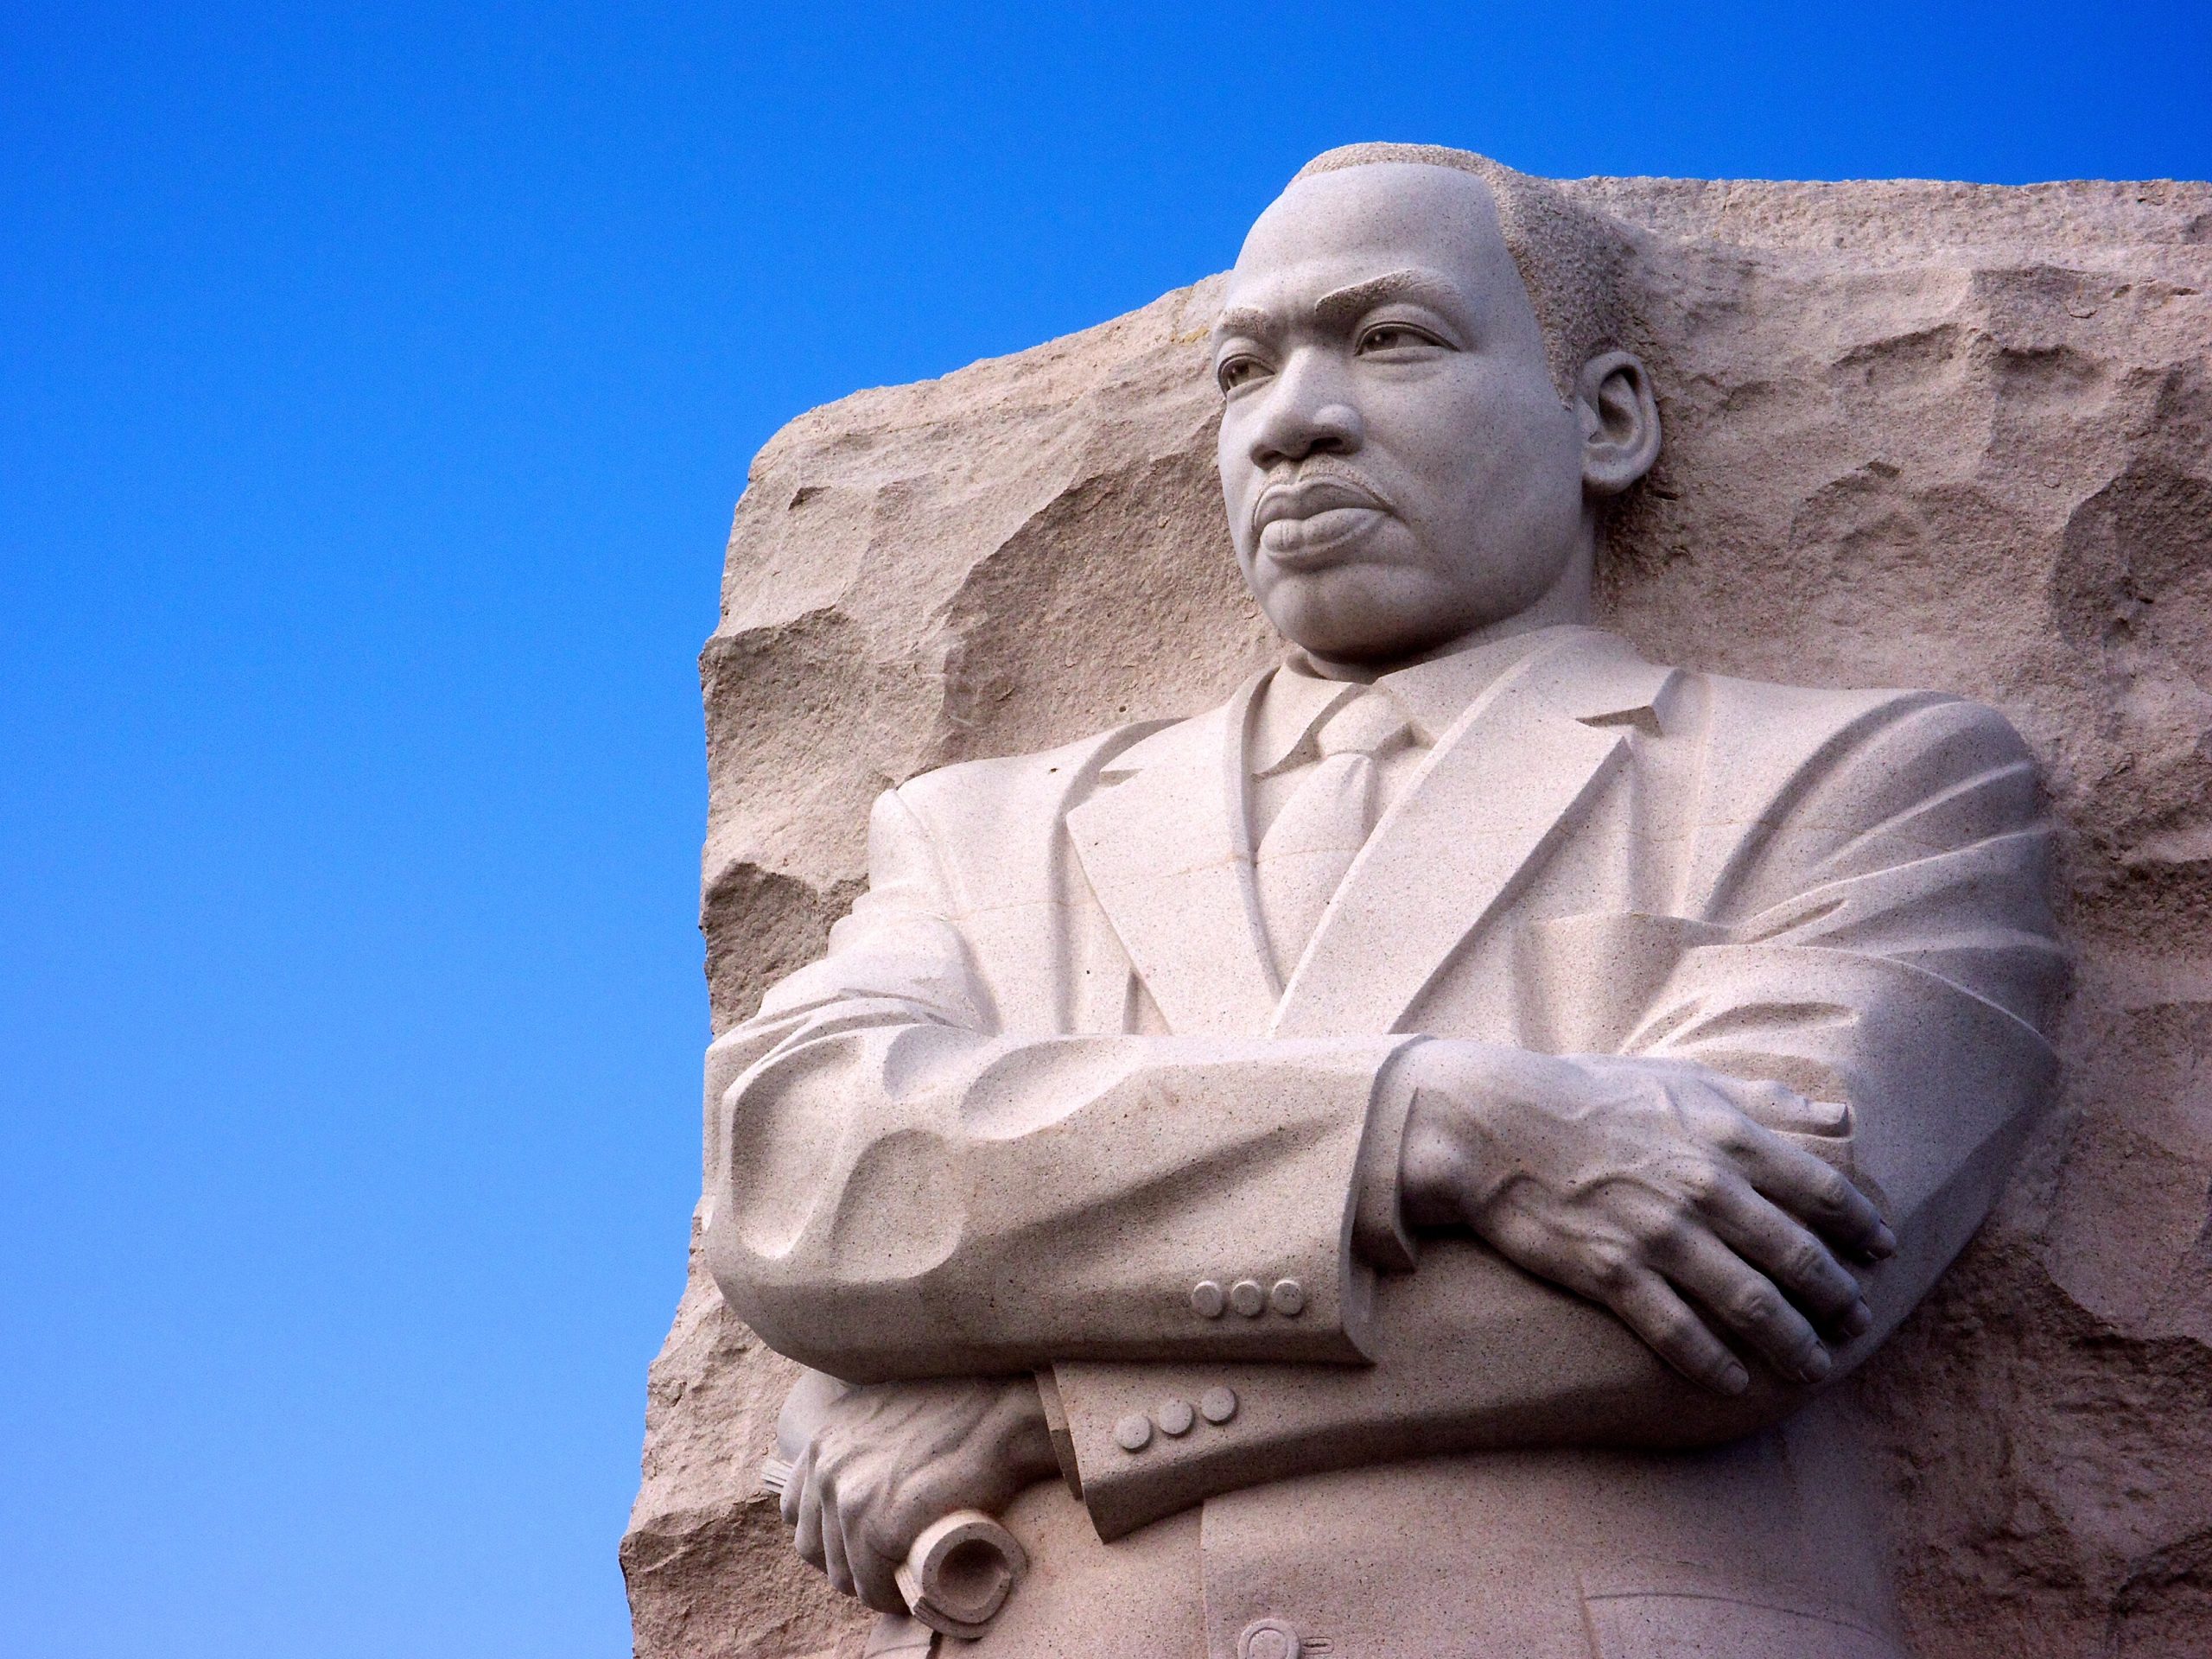 Stone monument of Martin Luther King